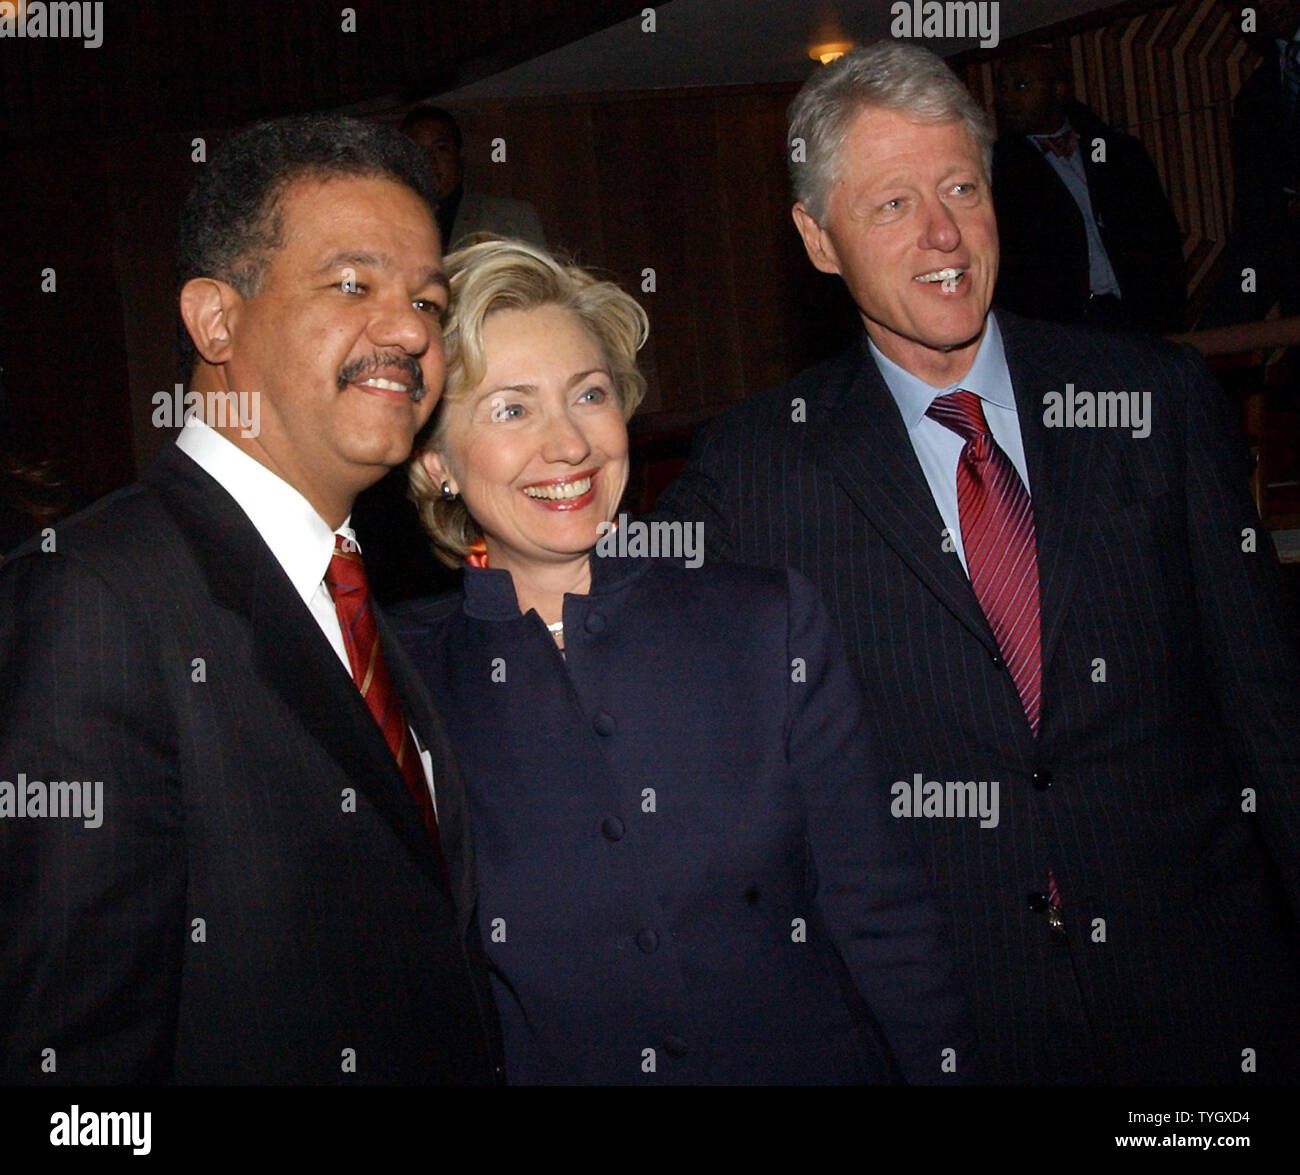 Former U.S. President William Clinton and his wife Senator Hillary Rodham Clinton are joined by President Leonel Fernandez of the Dominican Republic (left) prior to the start of the William Jefferson Clinton Foundation Energy Policy Forum held on 12/6/04 at New York University. (UPI Photo/Ezio Petersen) Stock Photo